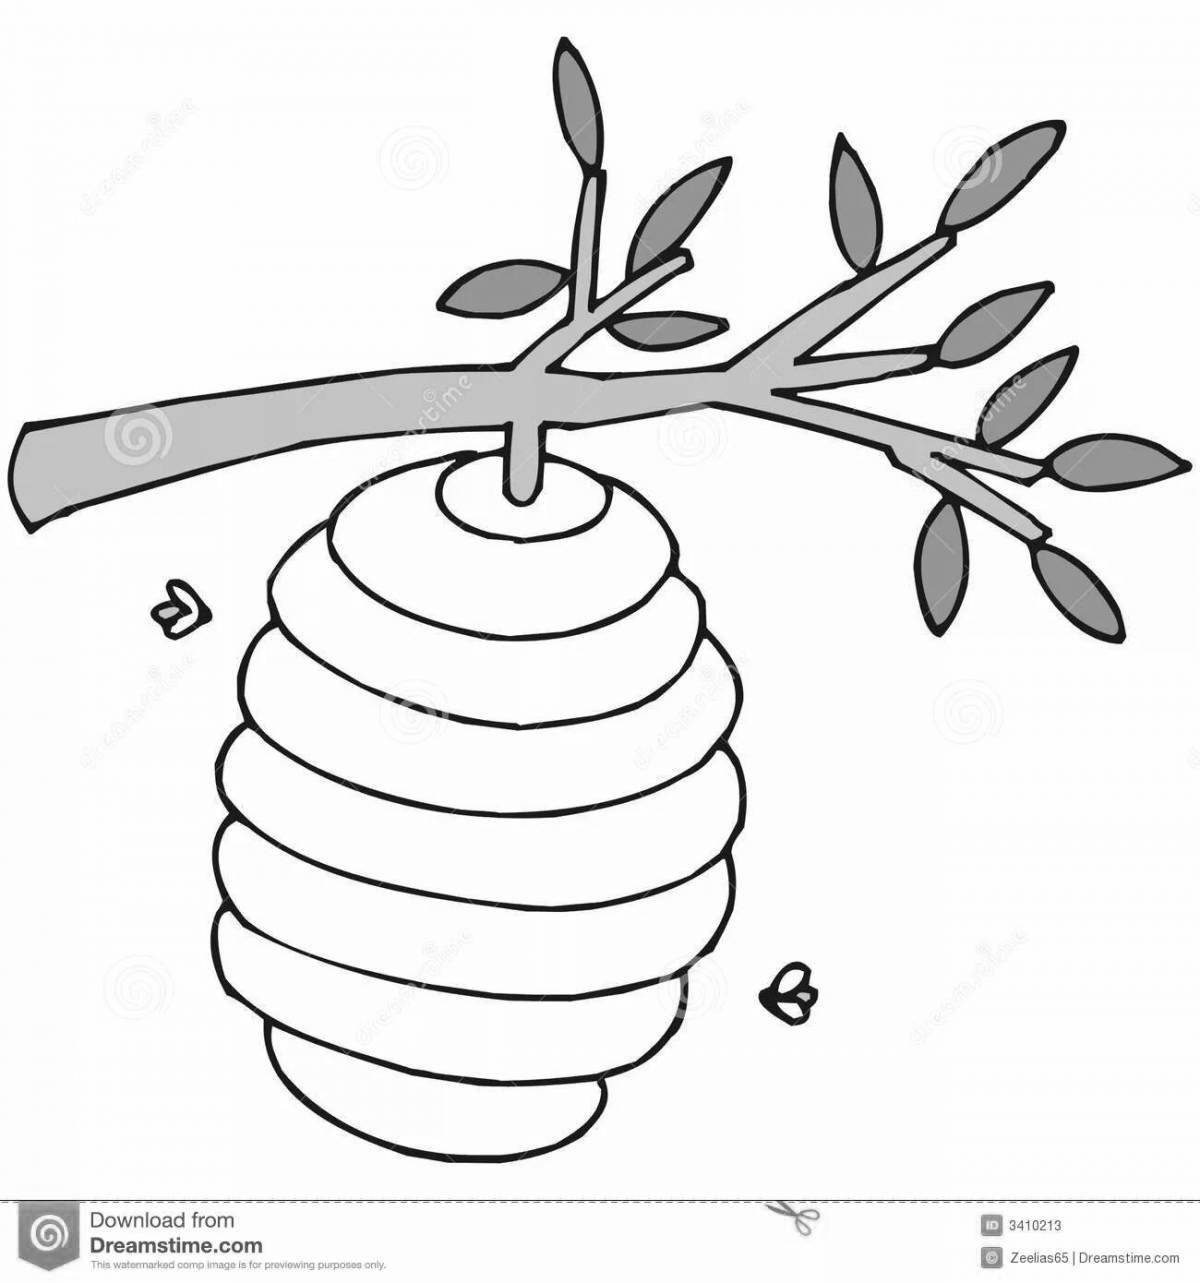 Rampant beehive coloring pages for kids